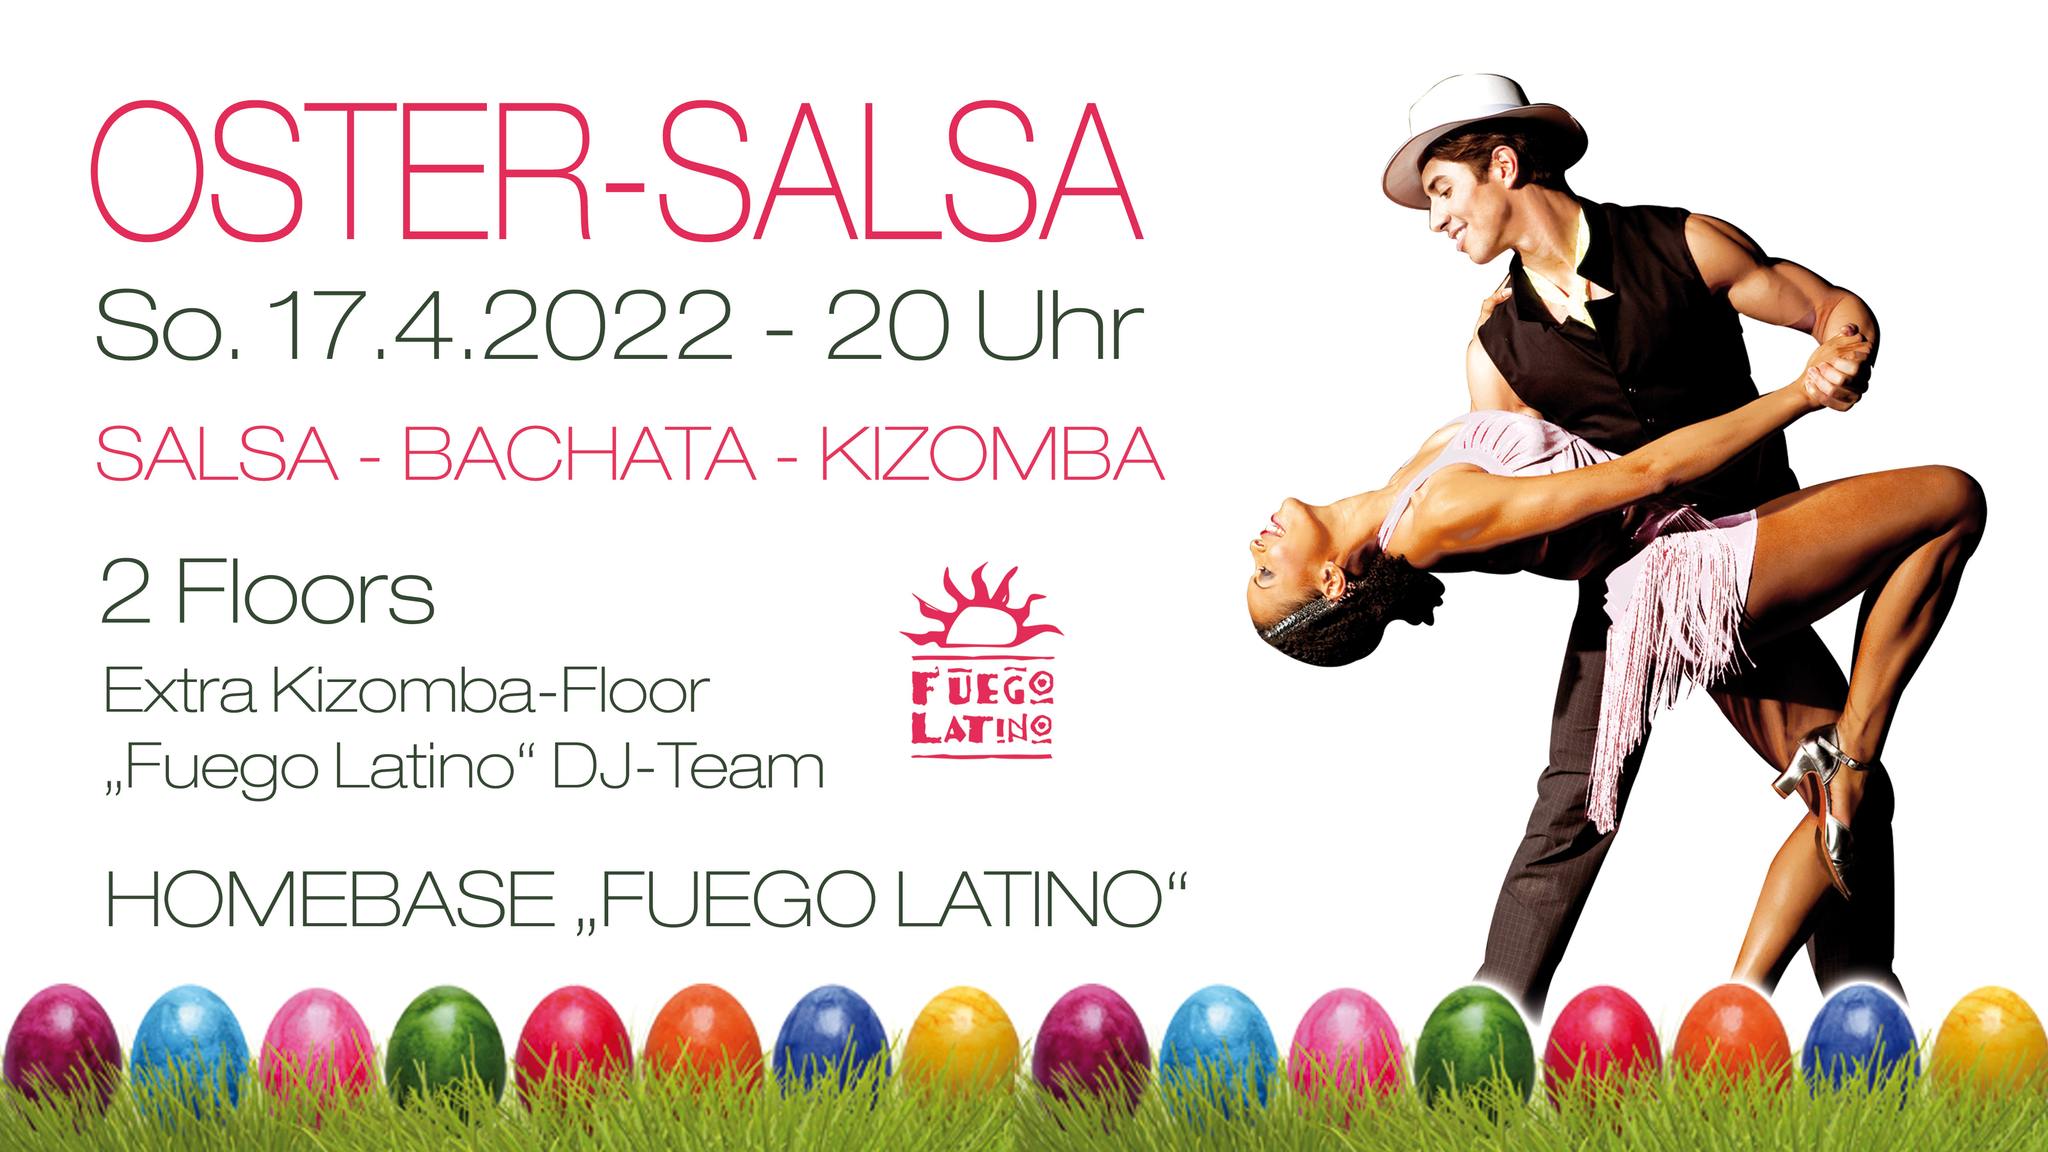 You are currently viewing “Oster-Salsa” – Salsa, Bachata & Kizomba in Offenburg